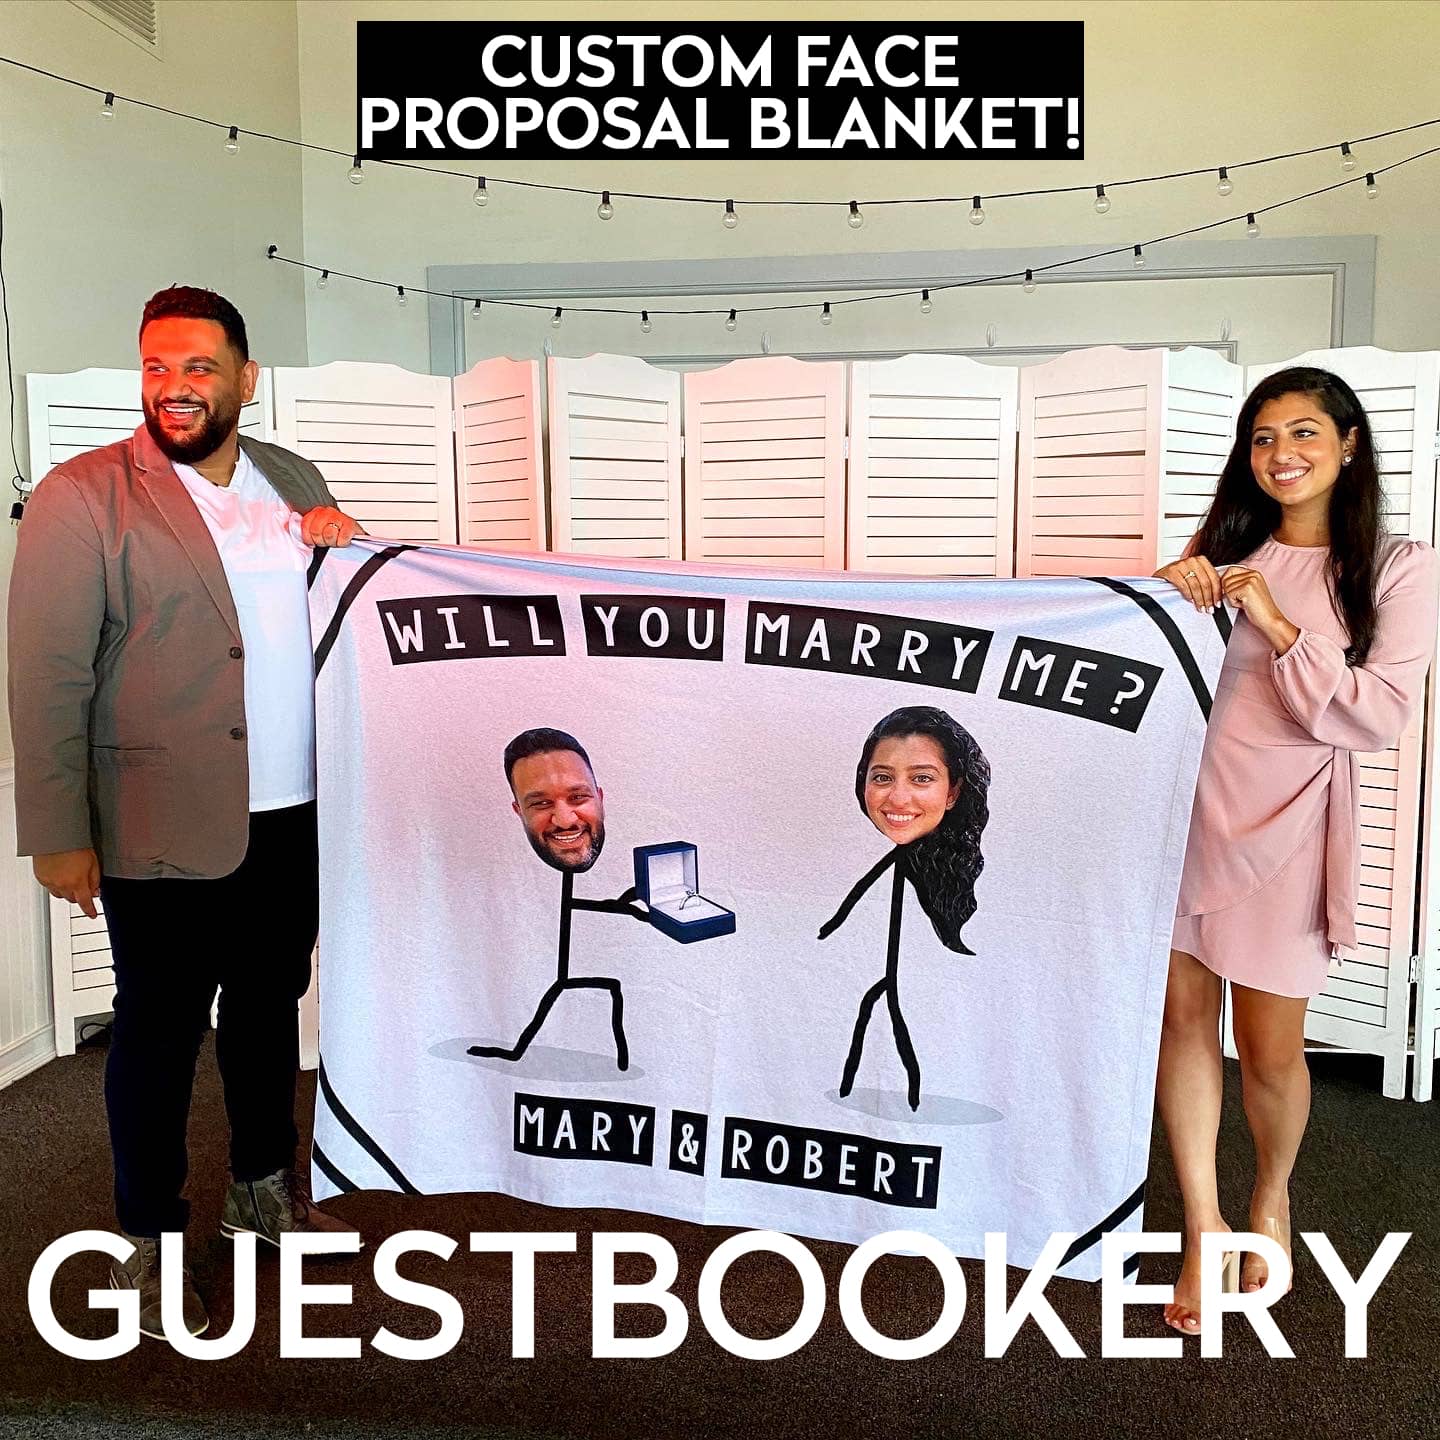 Custom Face Proposal Blanket - Will You Marry Me?